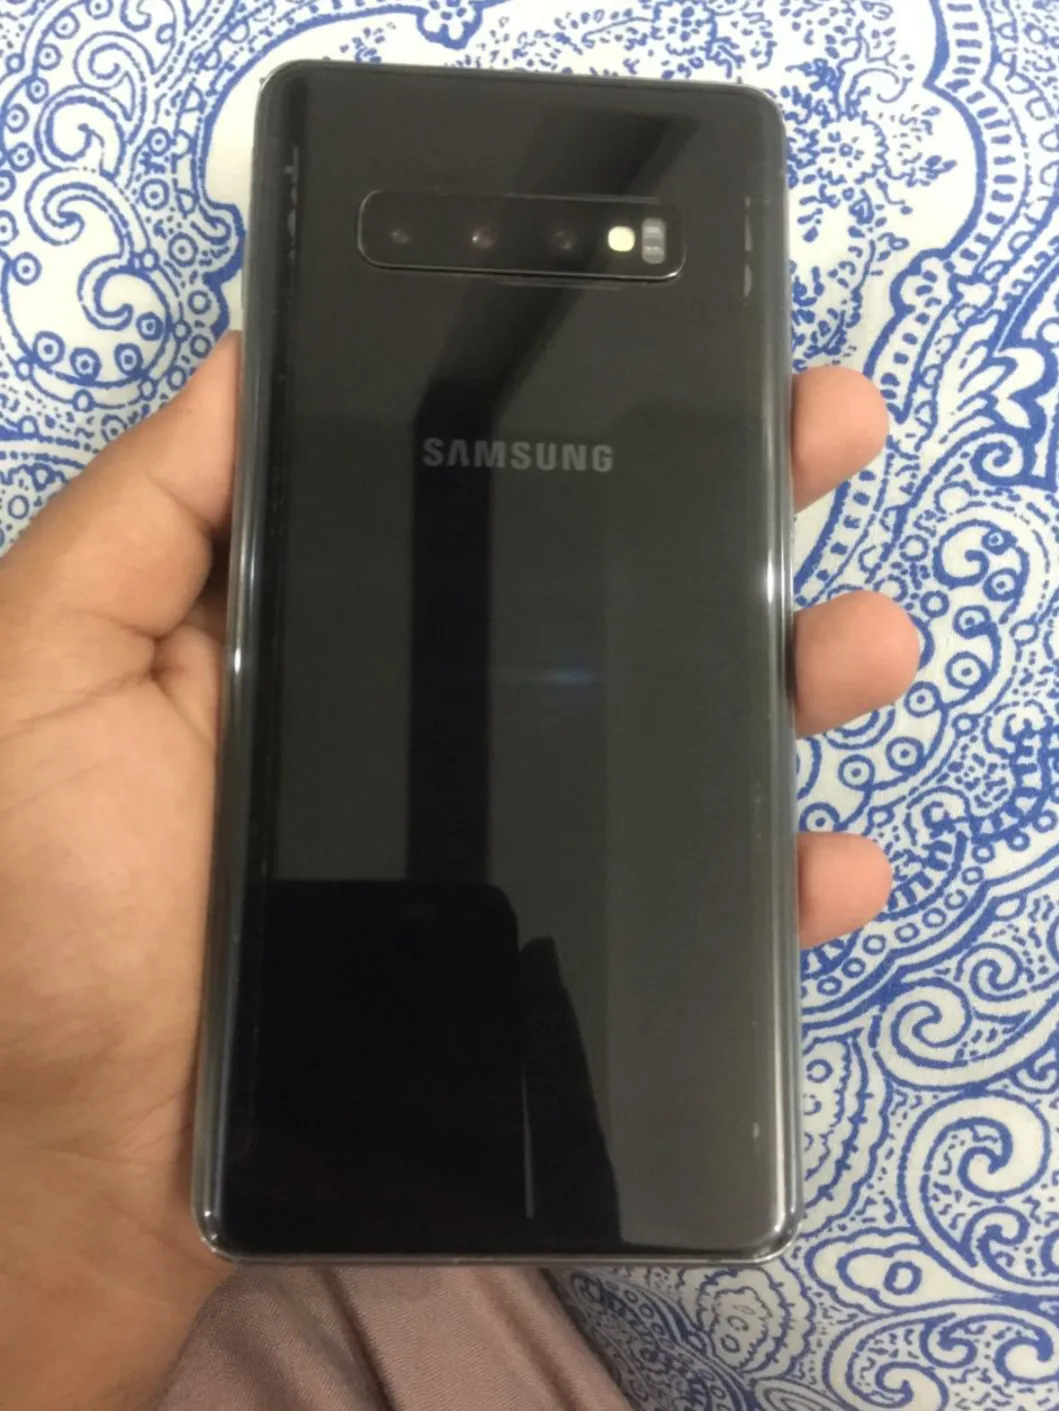 Samsung s10 plus 128gb Scratchless Mint condition 10/10 for sale - photo 1